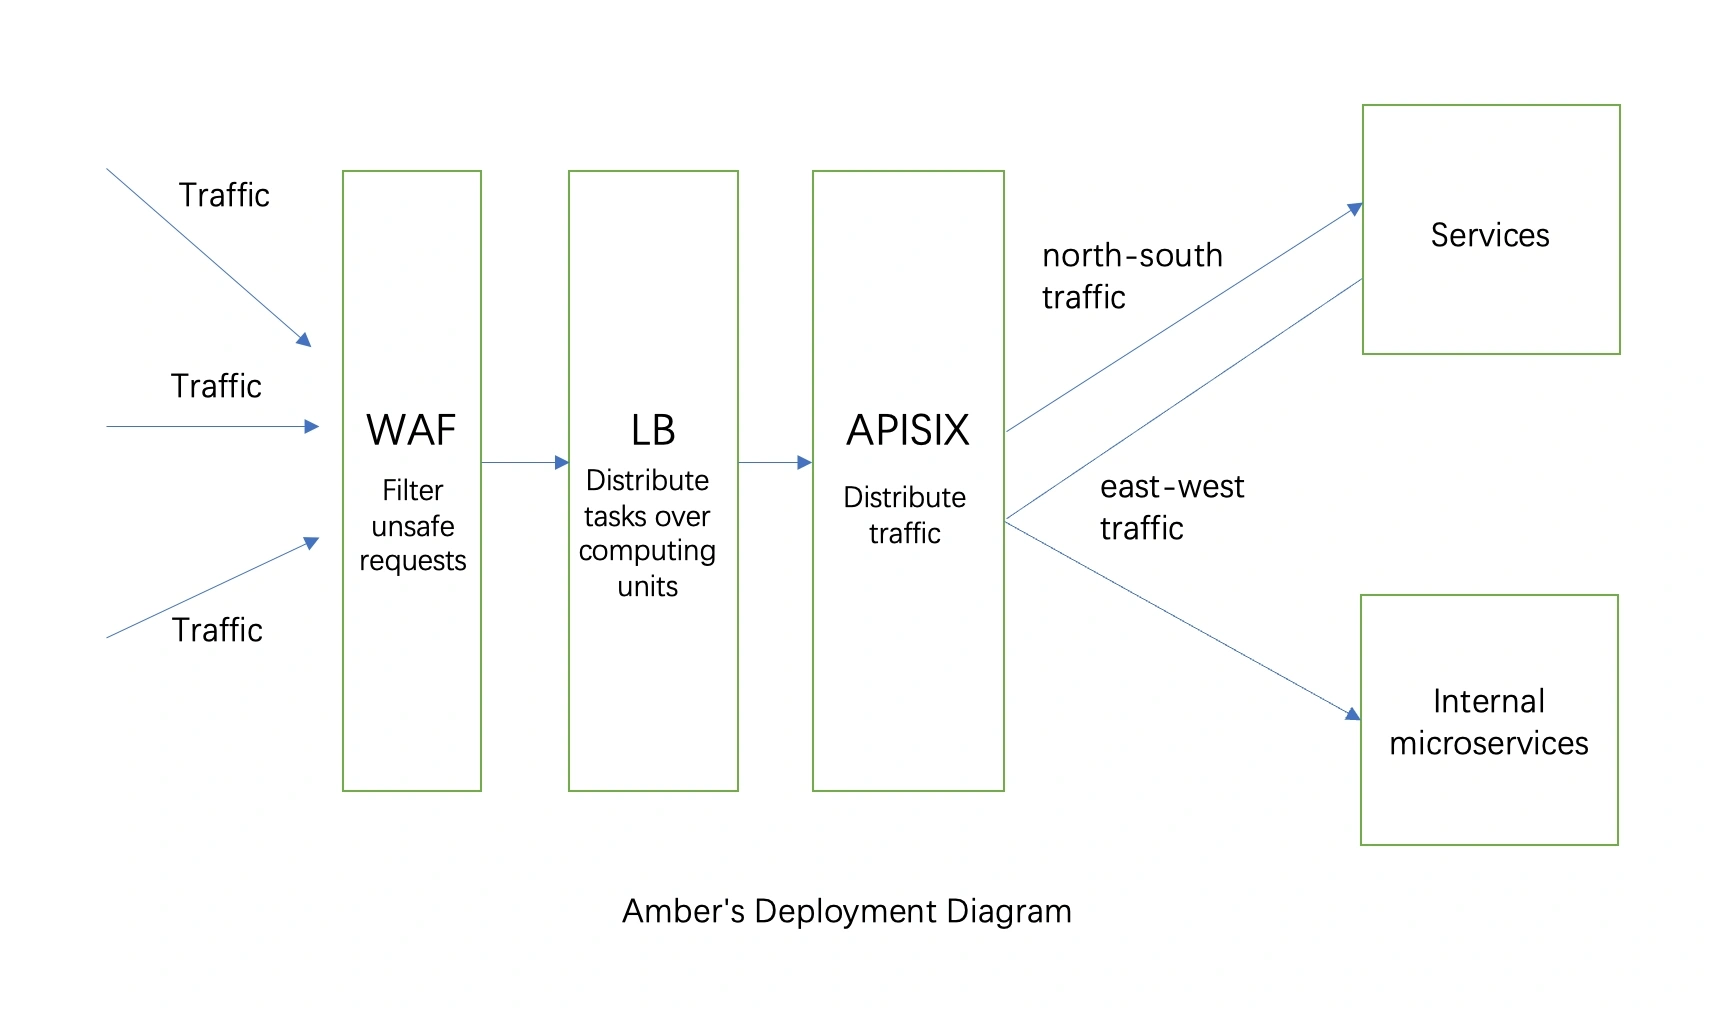 Amber Group's Deployment Diagram